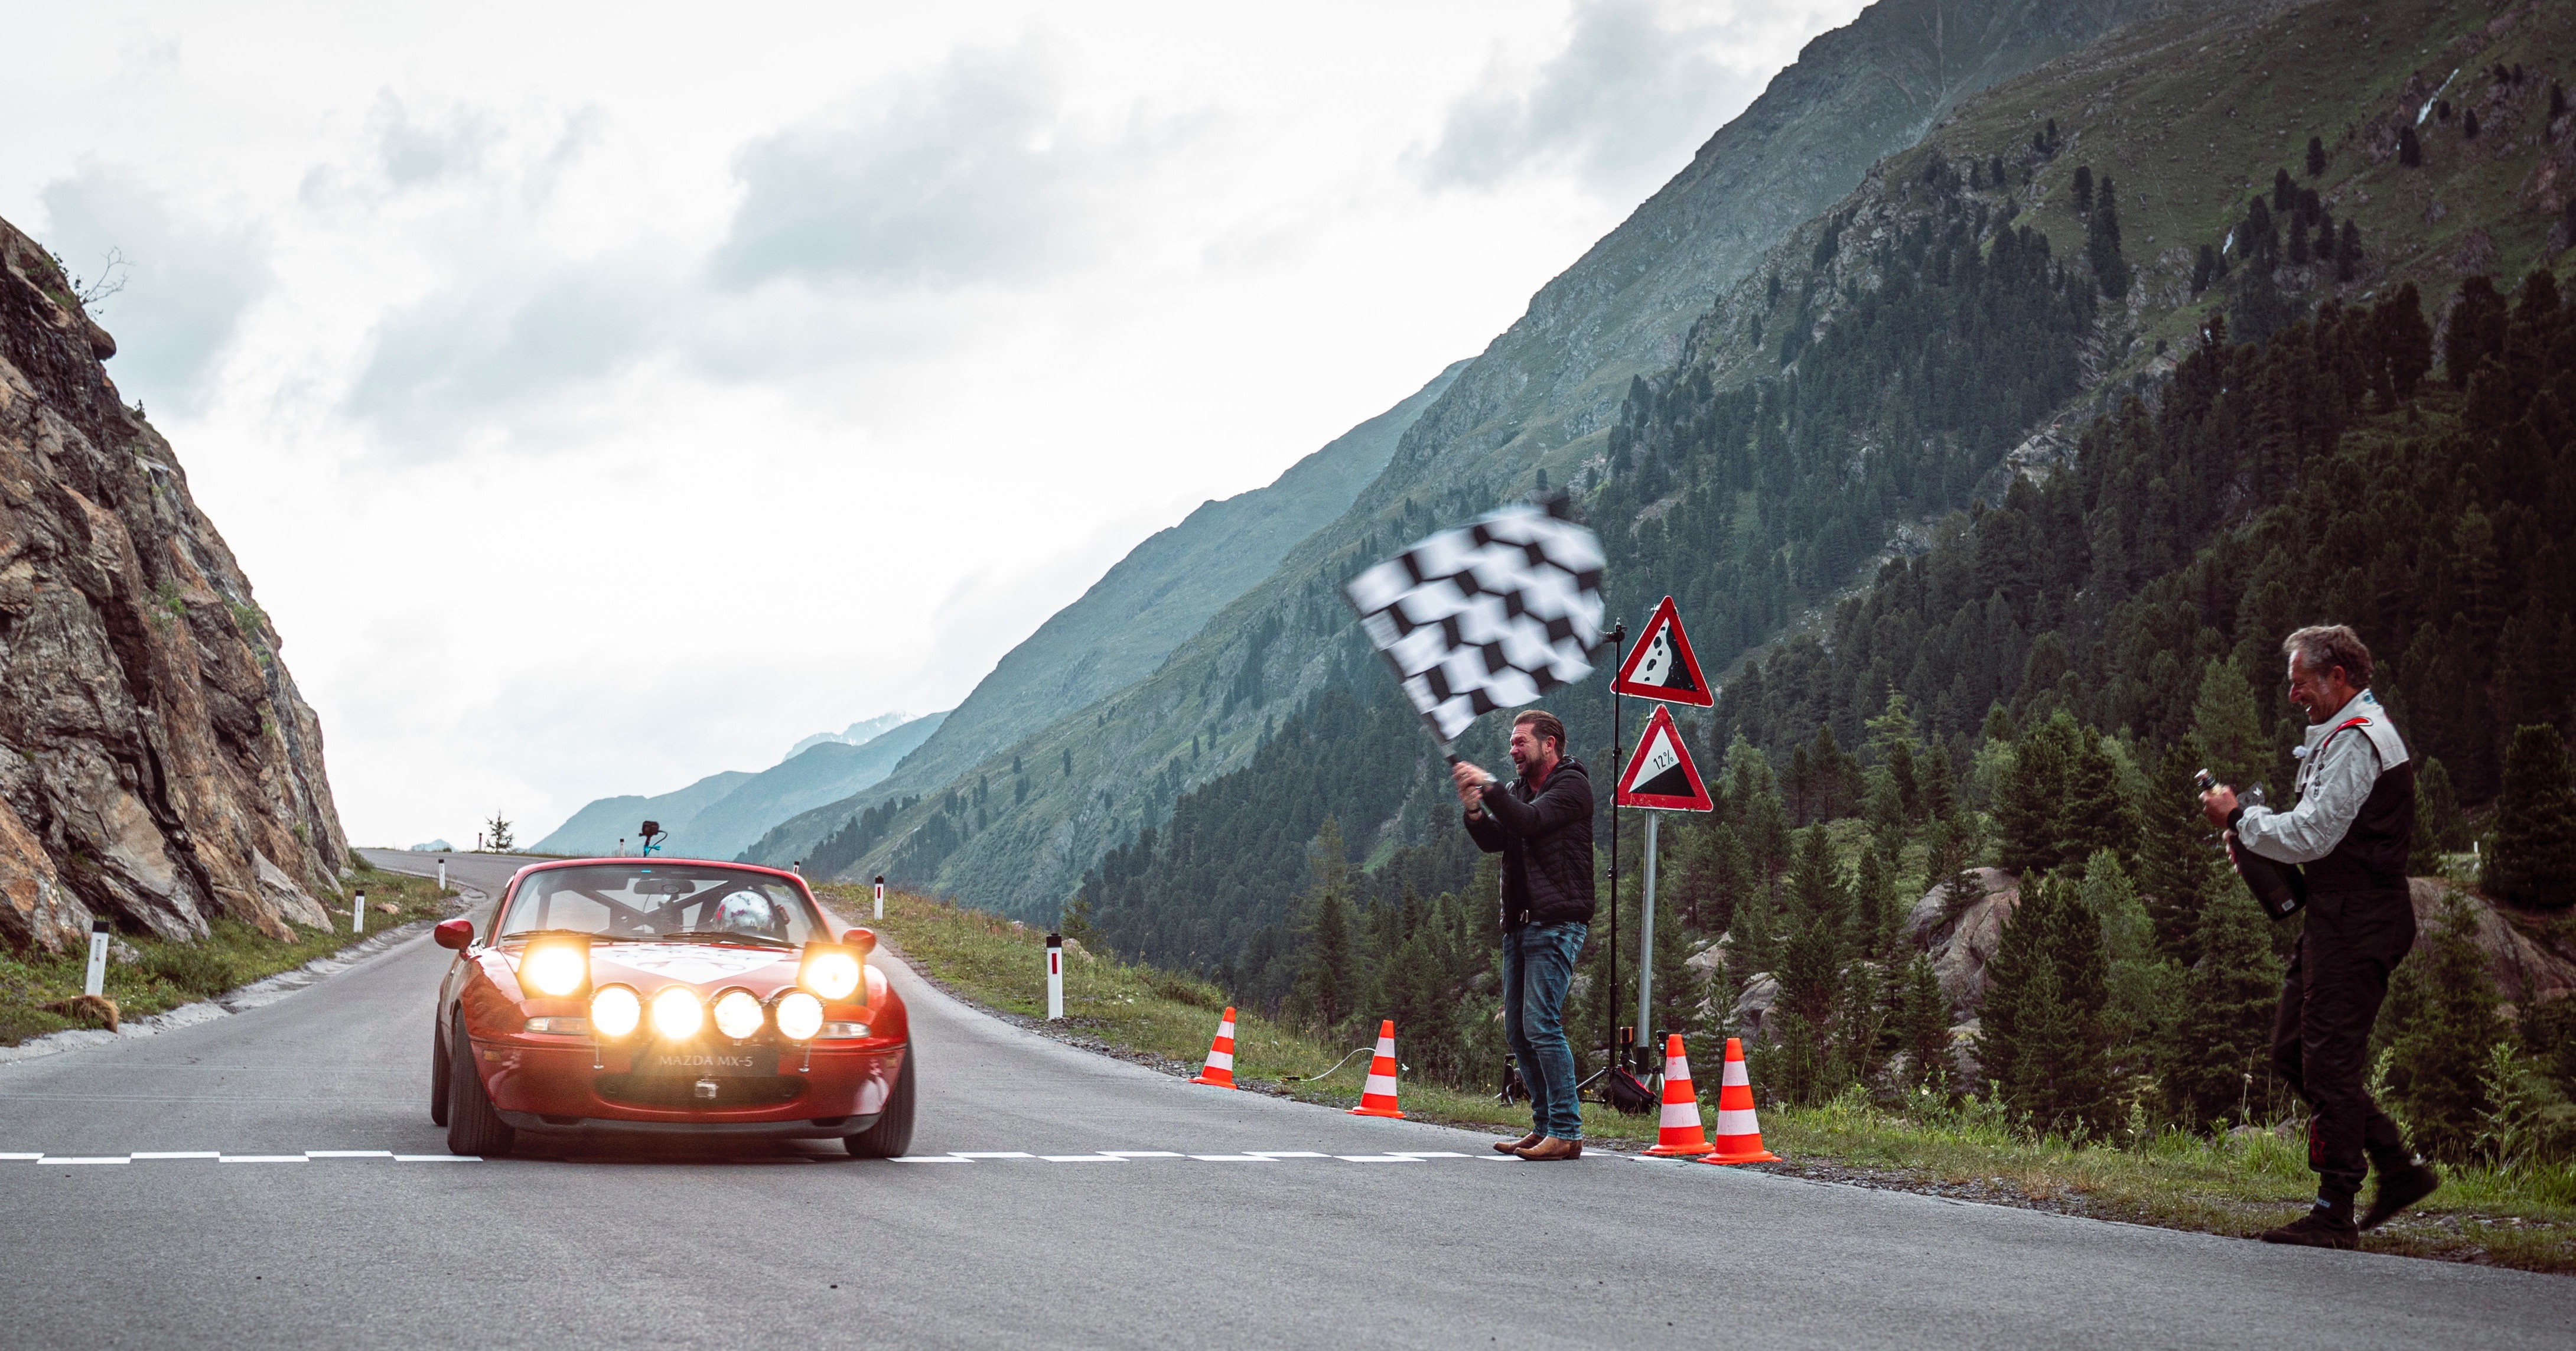 Pirelli tires, Vintage Miata claims record for most hairpin curves in 12-hour drive, ClassicCars.com Journal